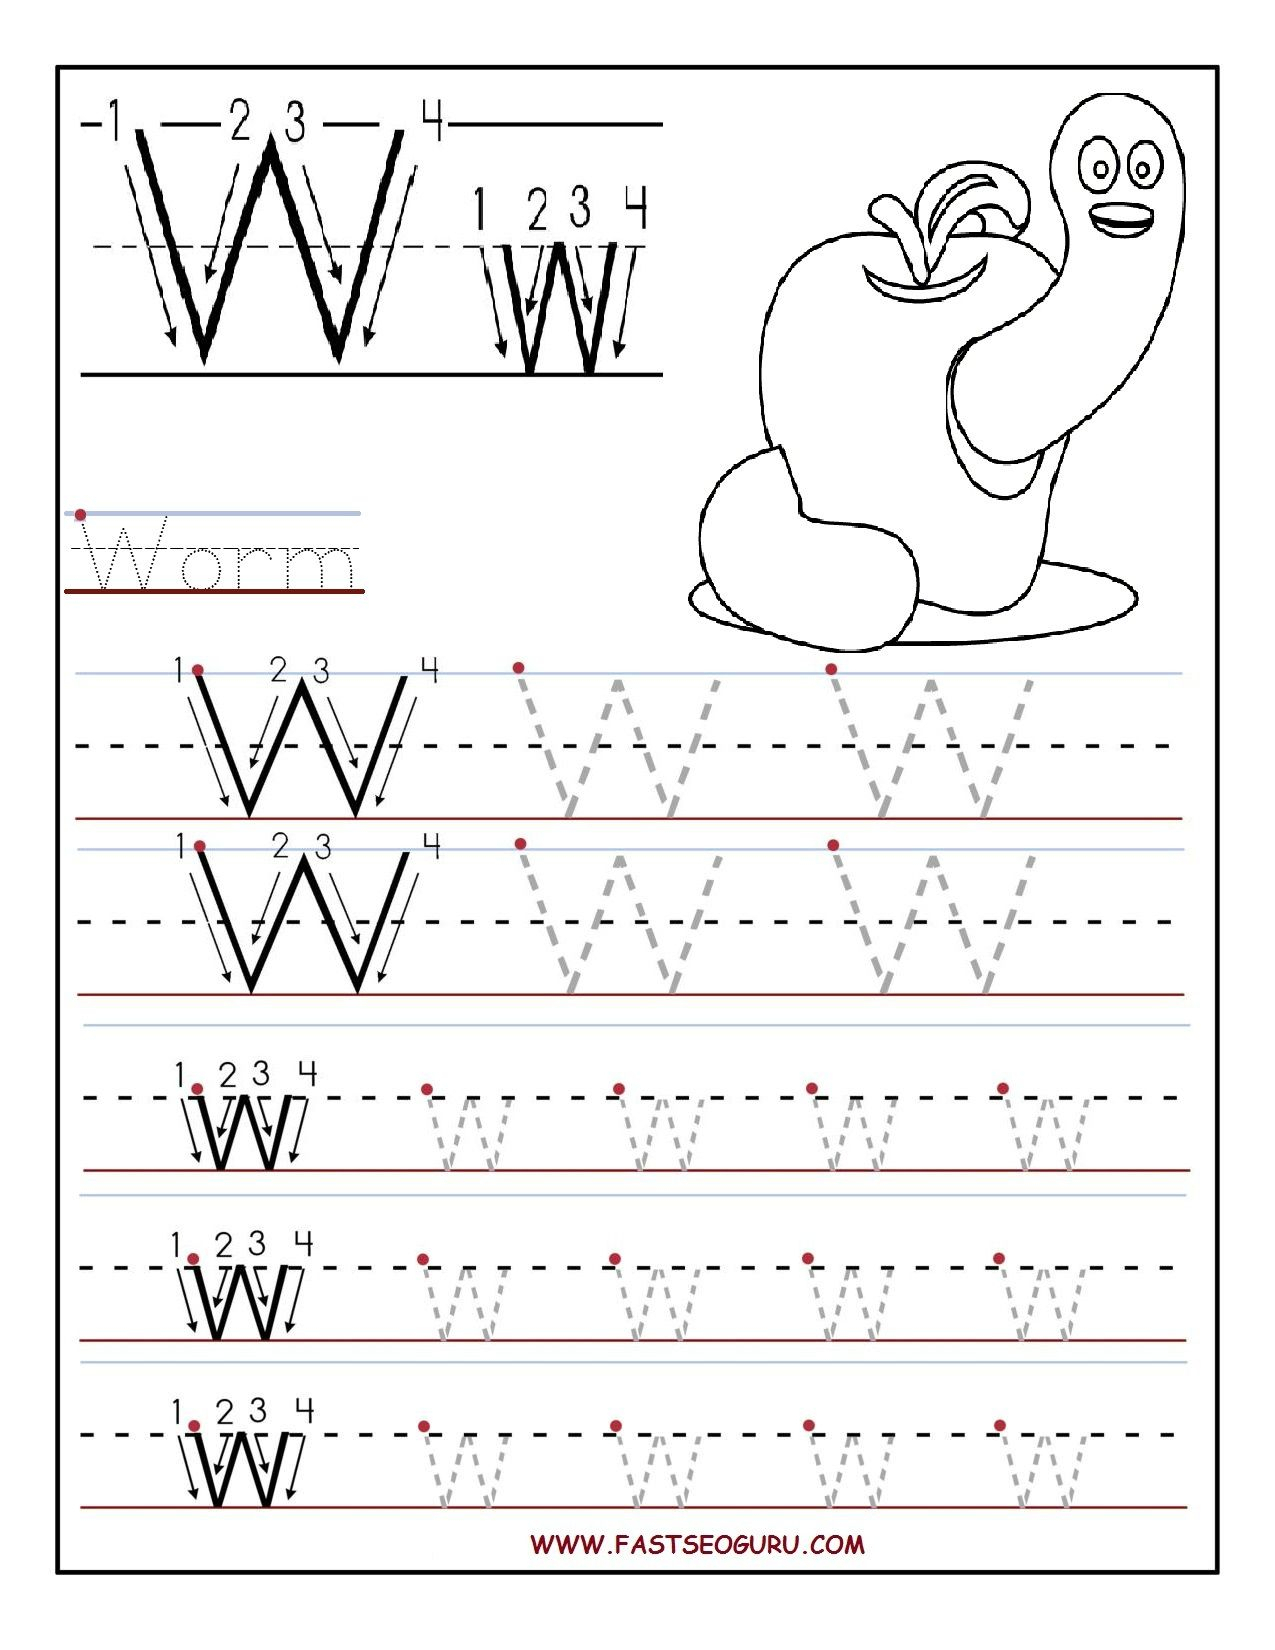 Printable Letter W Tracing Worksheets For Preschool with Letter W Worksheets Printable